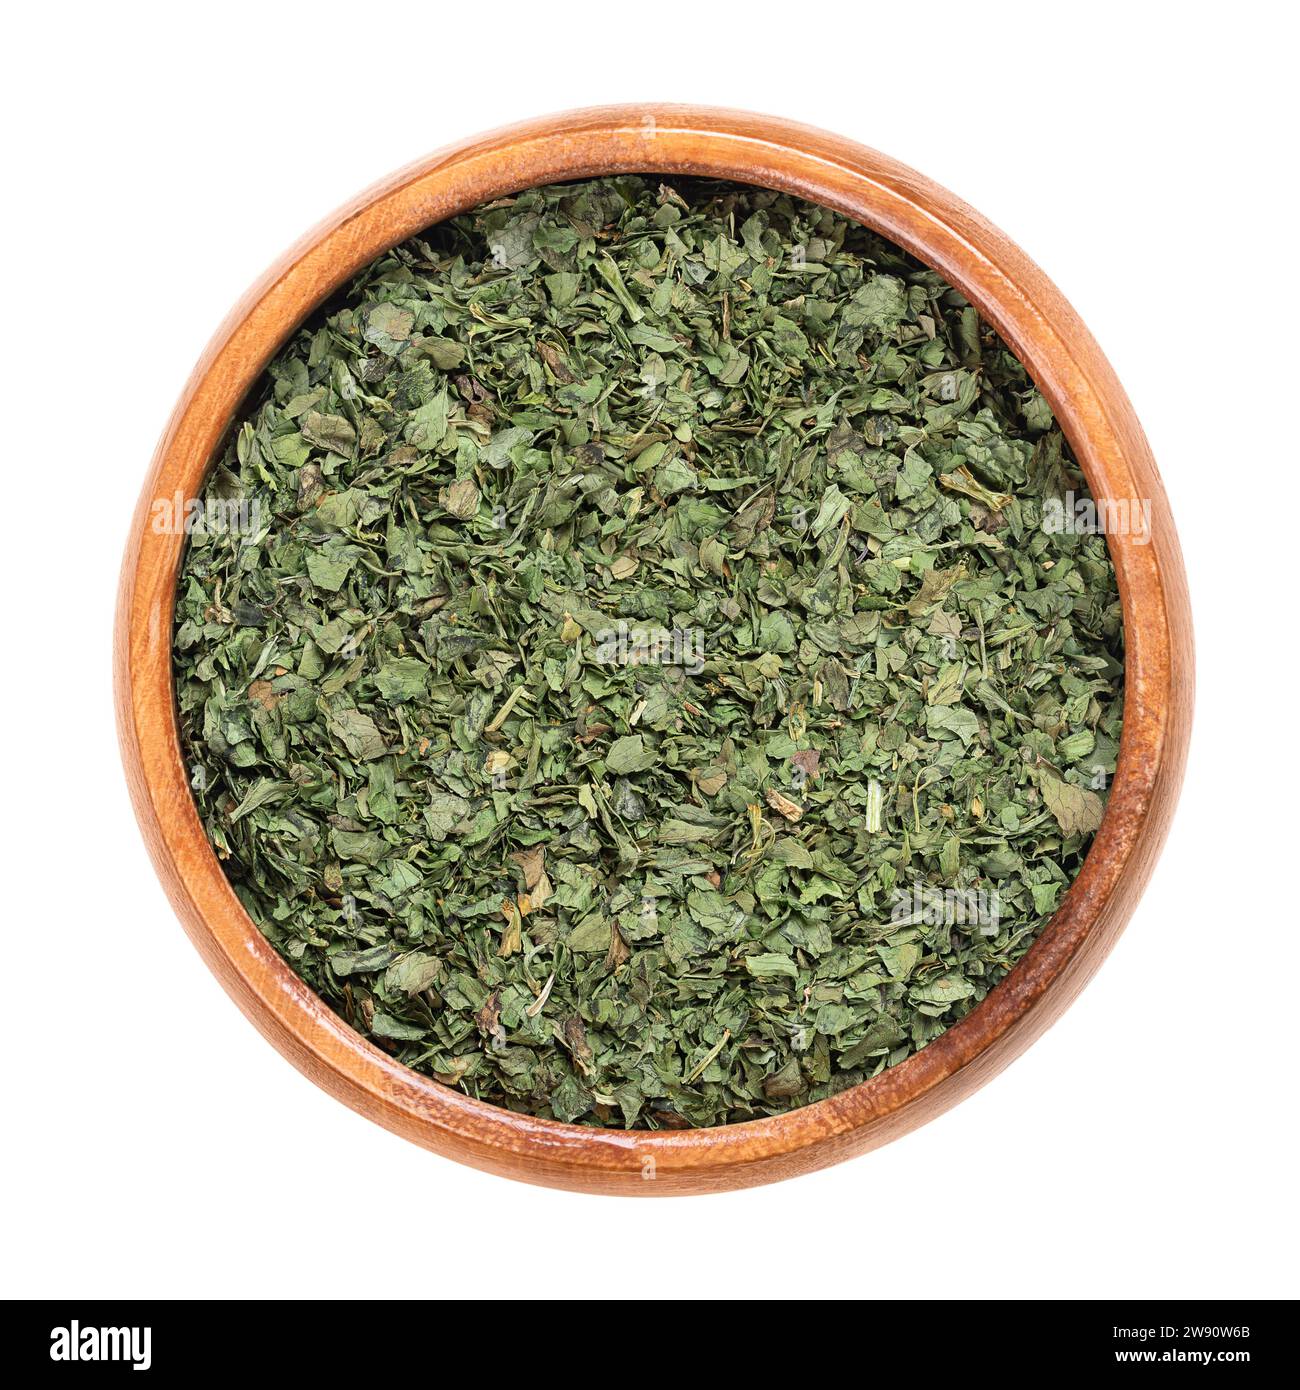 Dried cilantro leaves, in a wooden bowl. Coriander leaves, an annual herb in the family Apiaceae, used in cooking, with a tart, lemon taste. Stock Photo